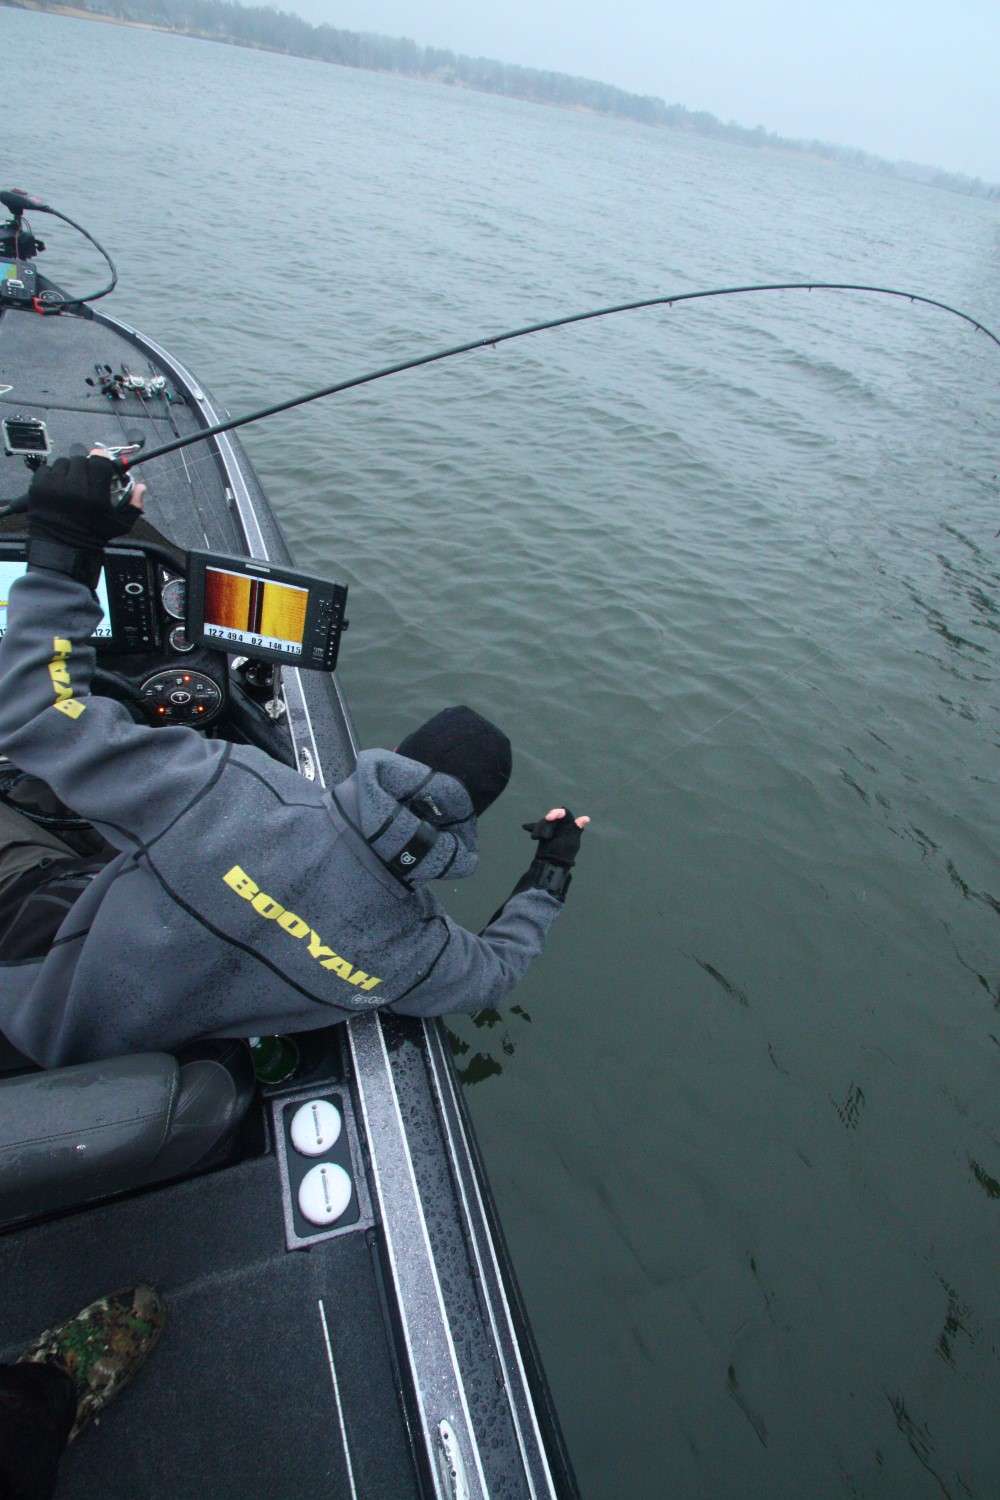 11:50 a.m. Swindle moves to the console to land a big bass heâs hung on a jerkbait.